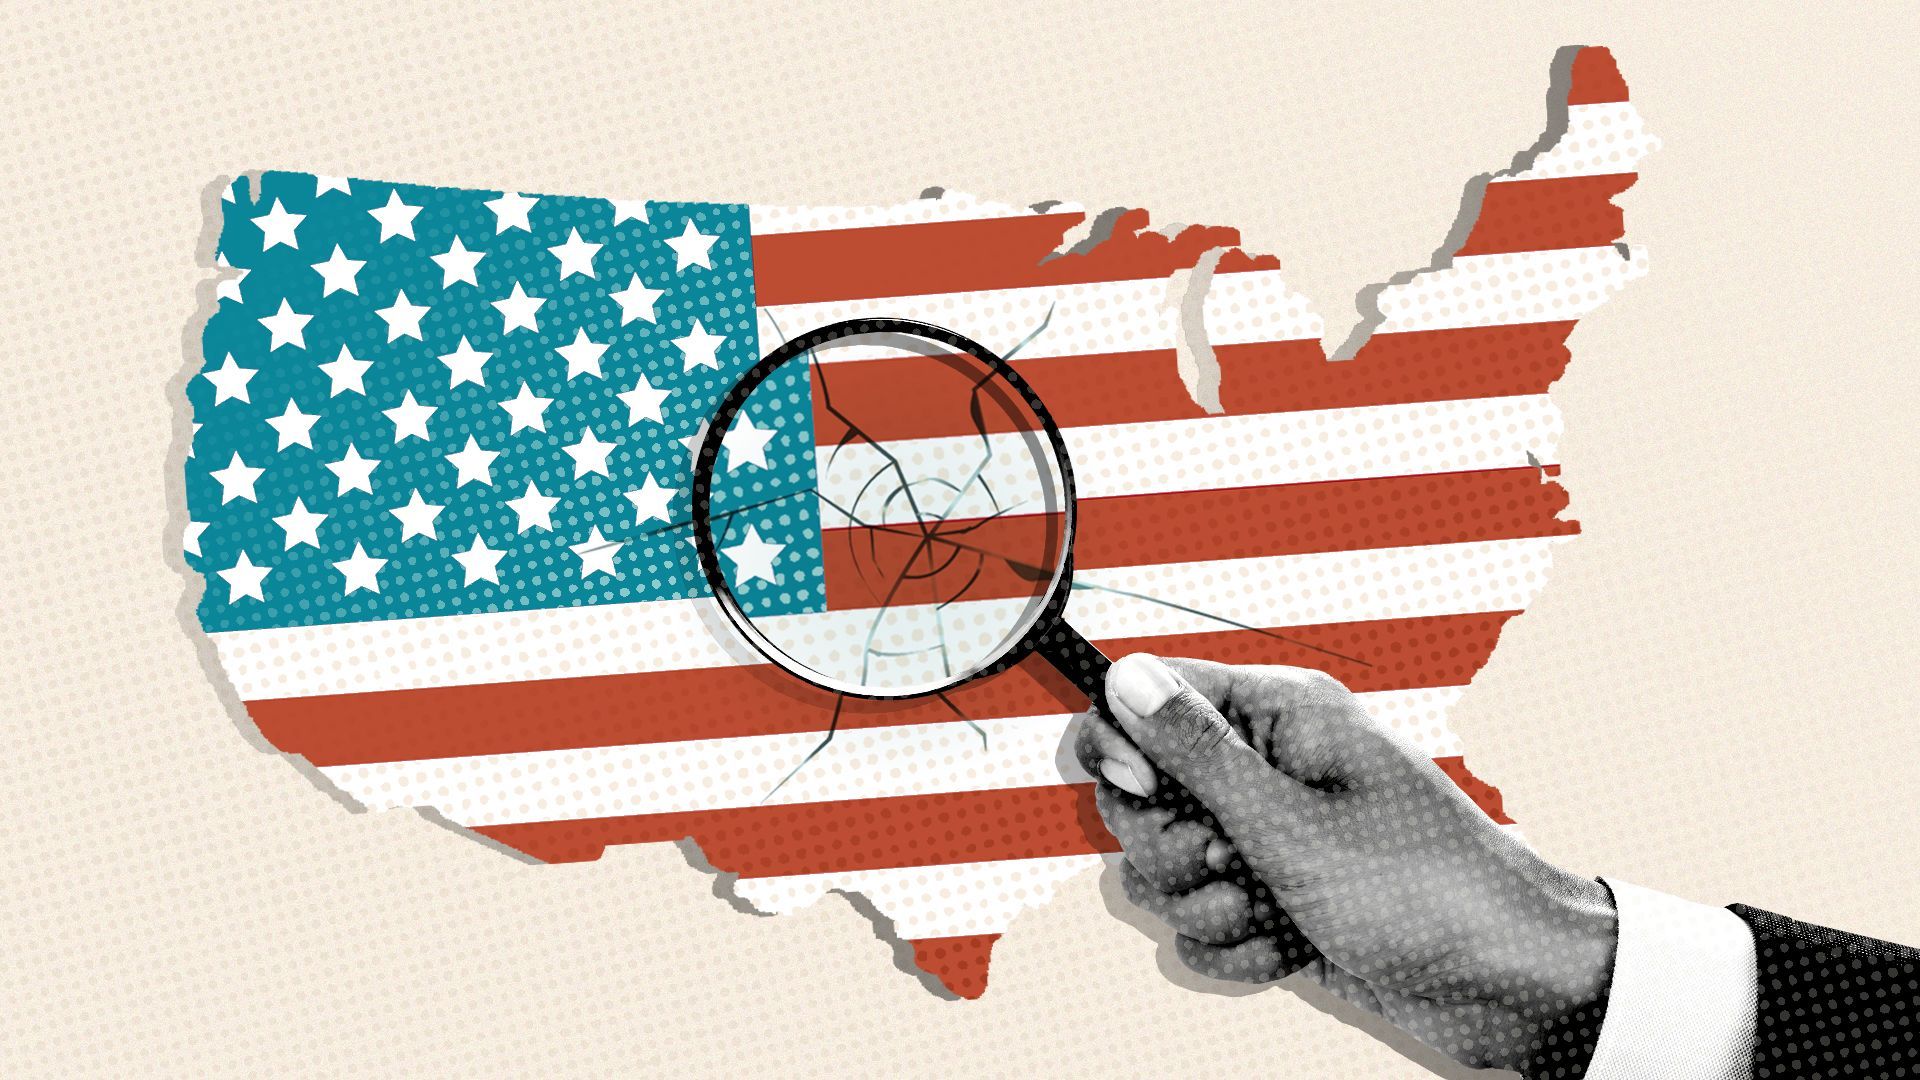 Illustration of US map with the flag on top and a large crack in the center. A hand is holding a magnifying glass up to the crack. 